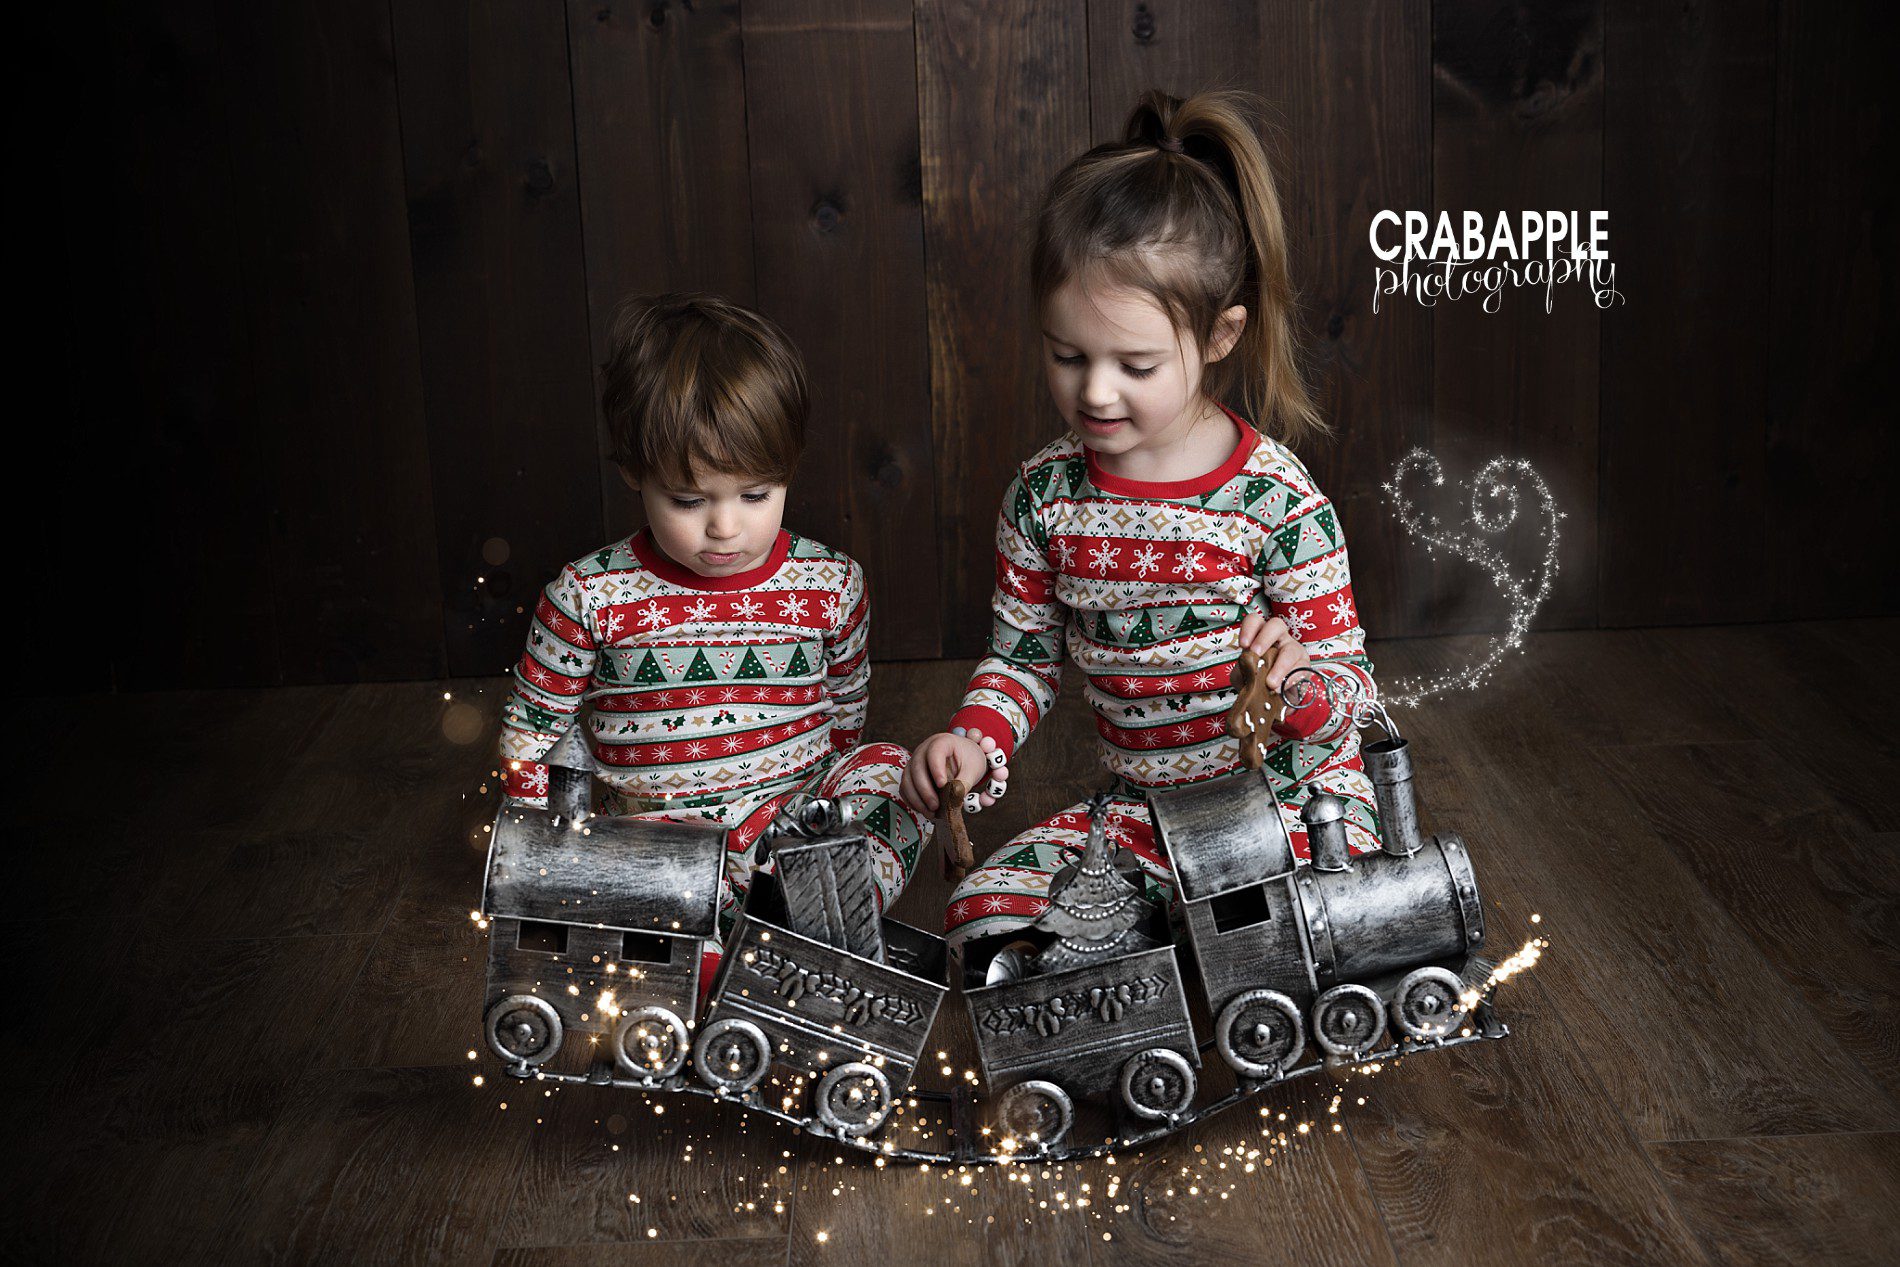 polar express inspired train photos for christmas with kids